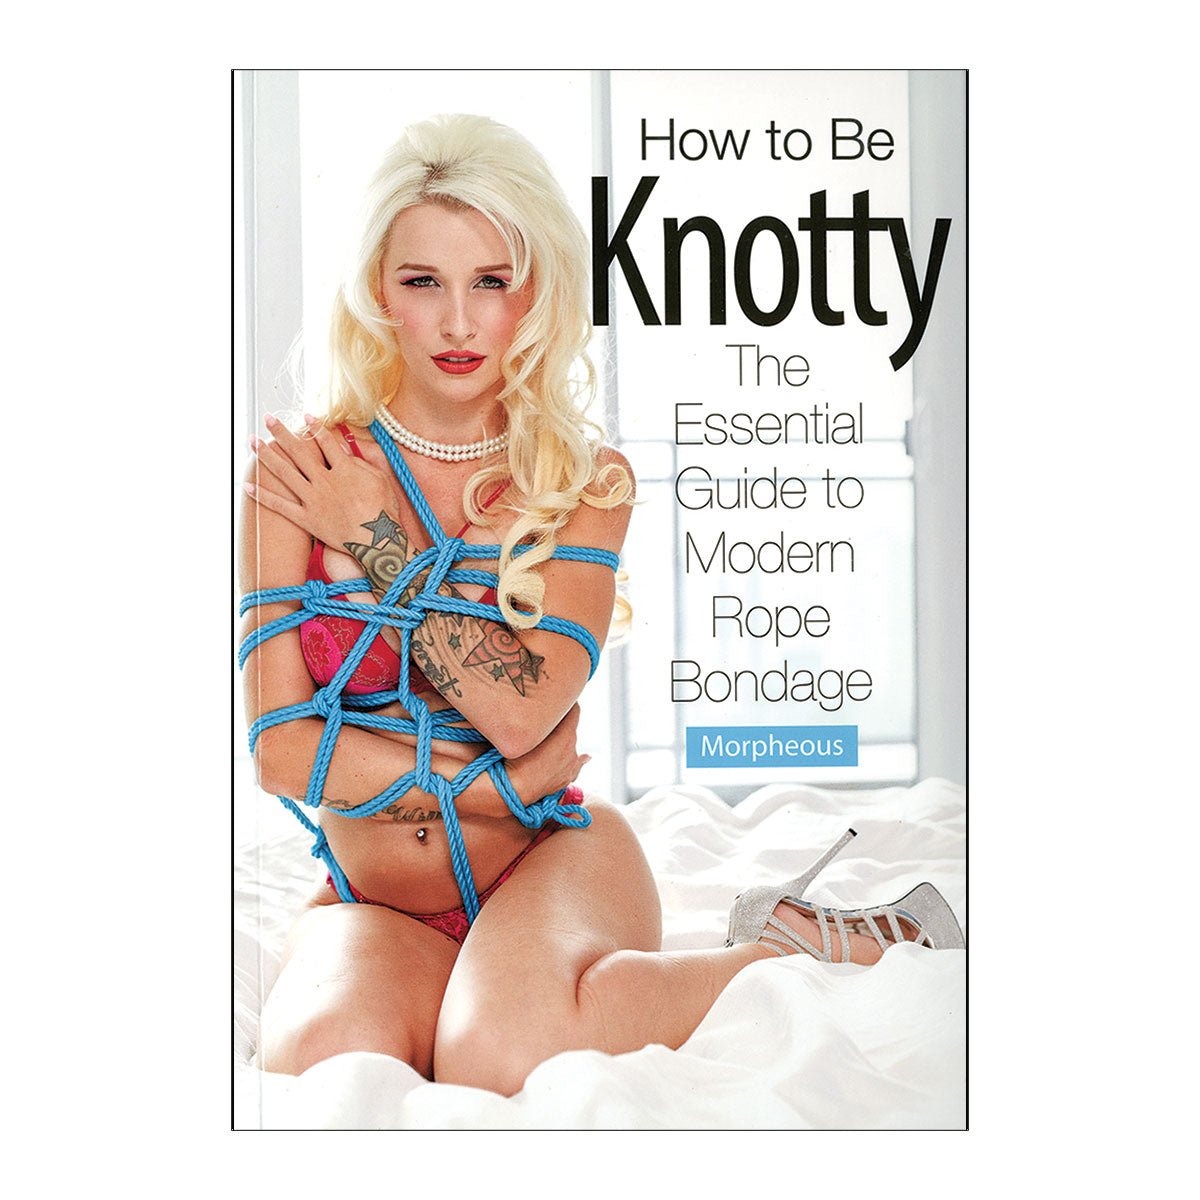 How to Be Knotty Books